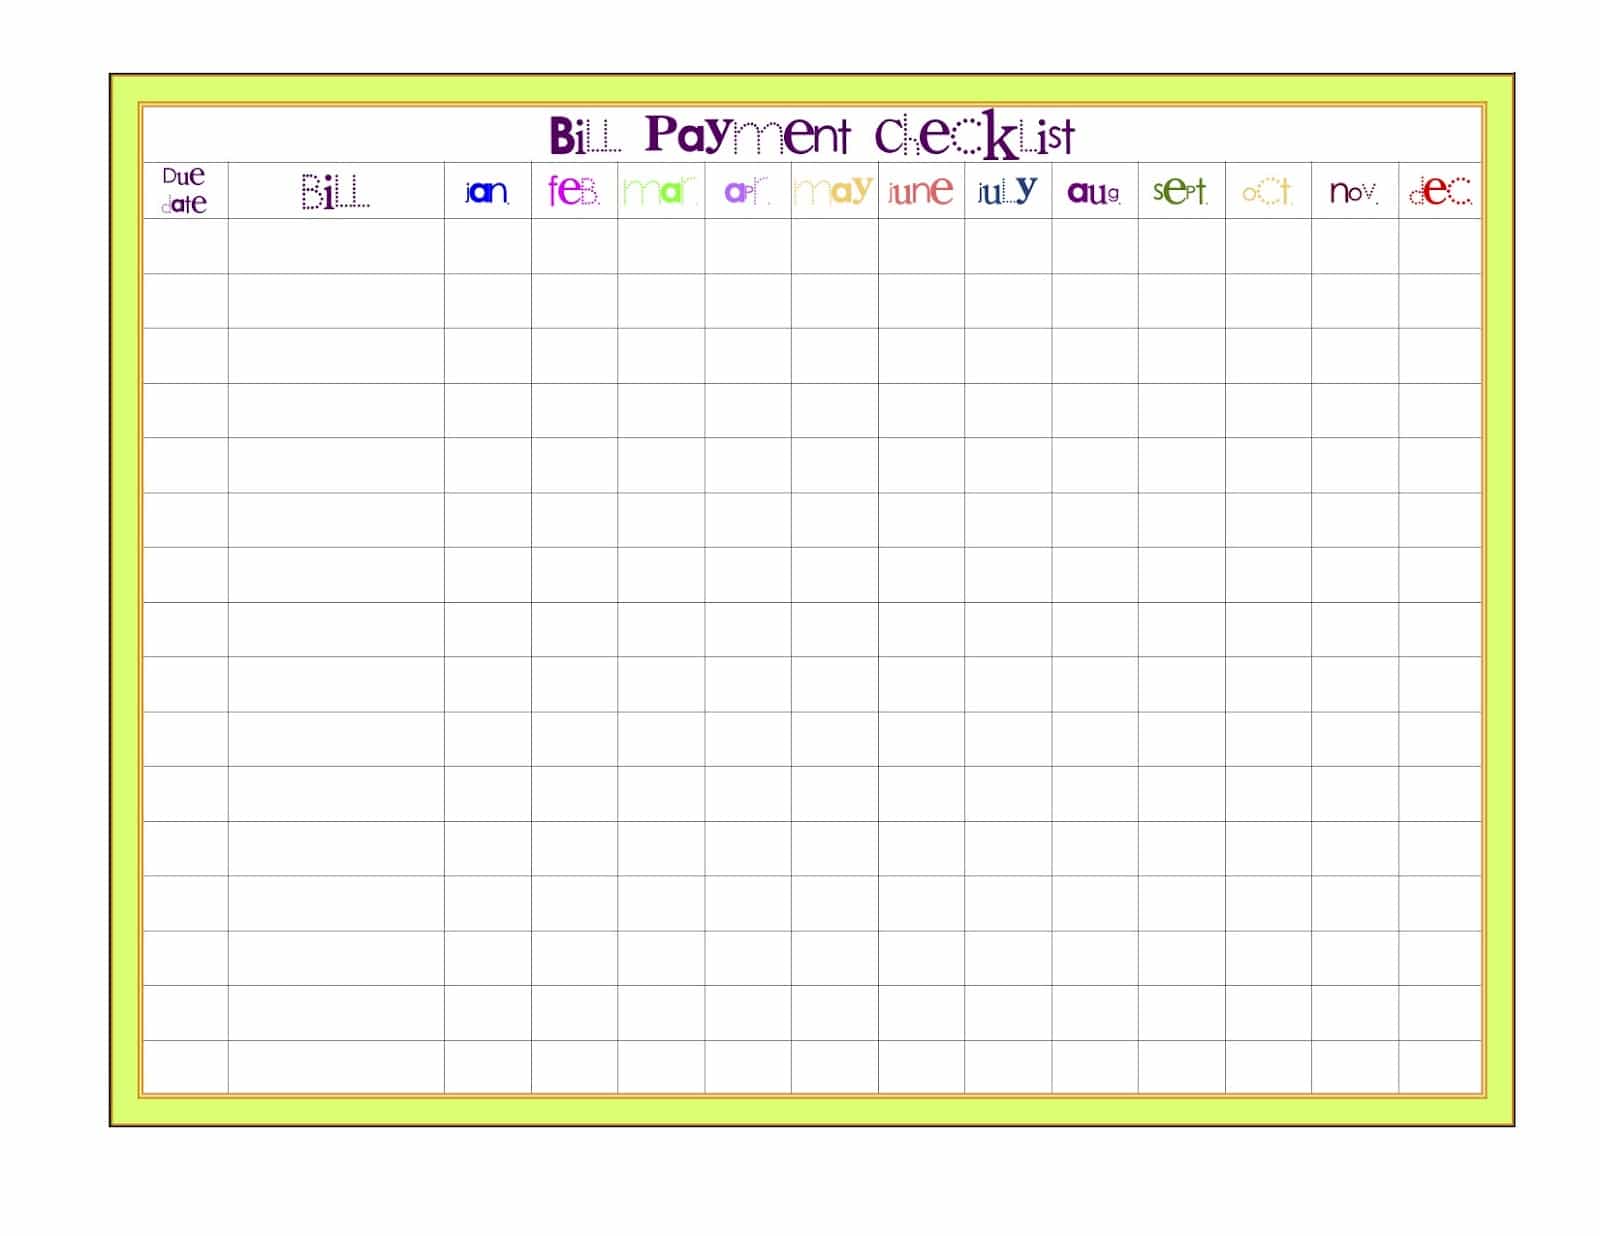 Bill list template excel and printable bill pay list